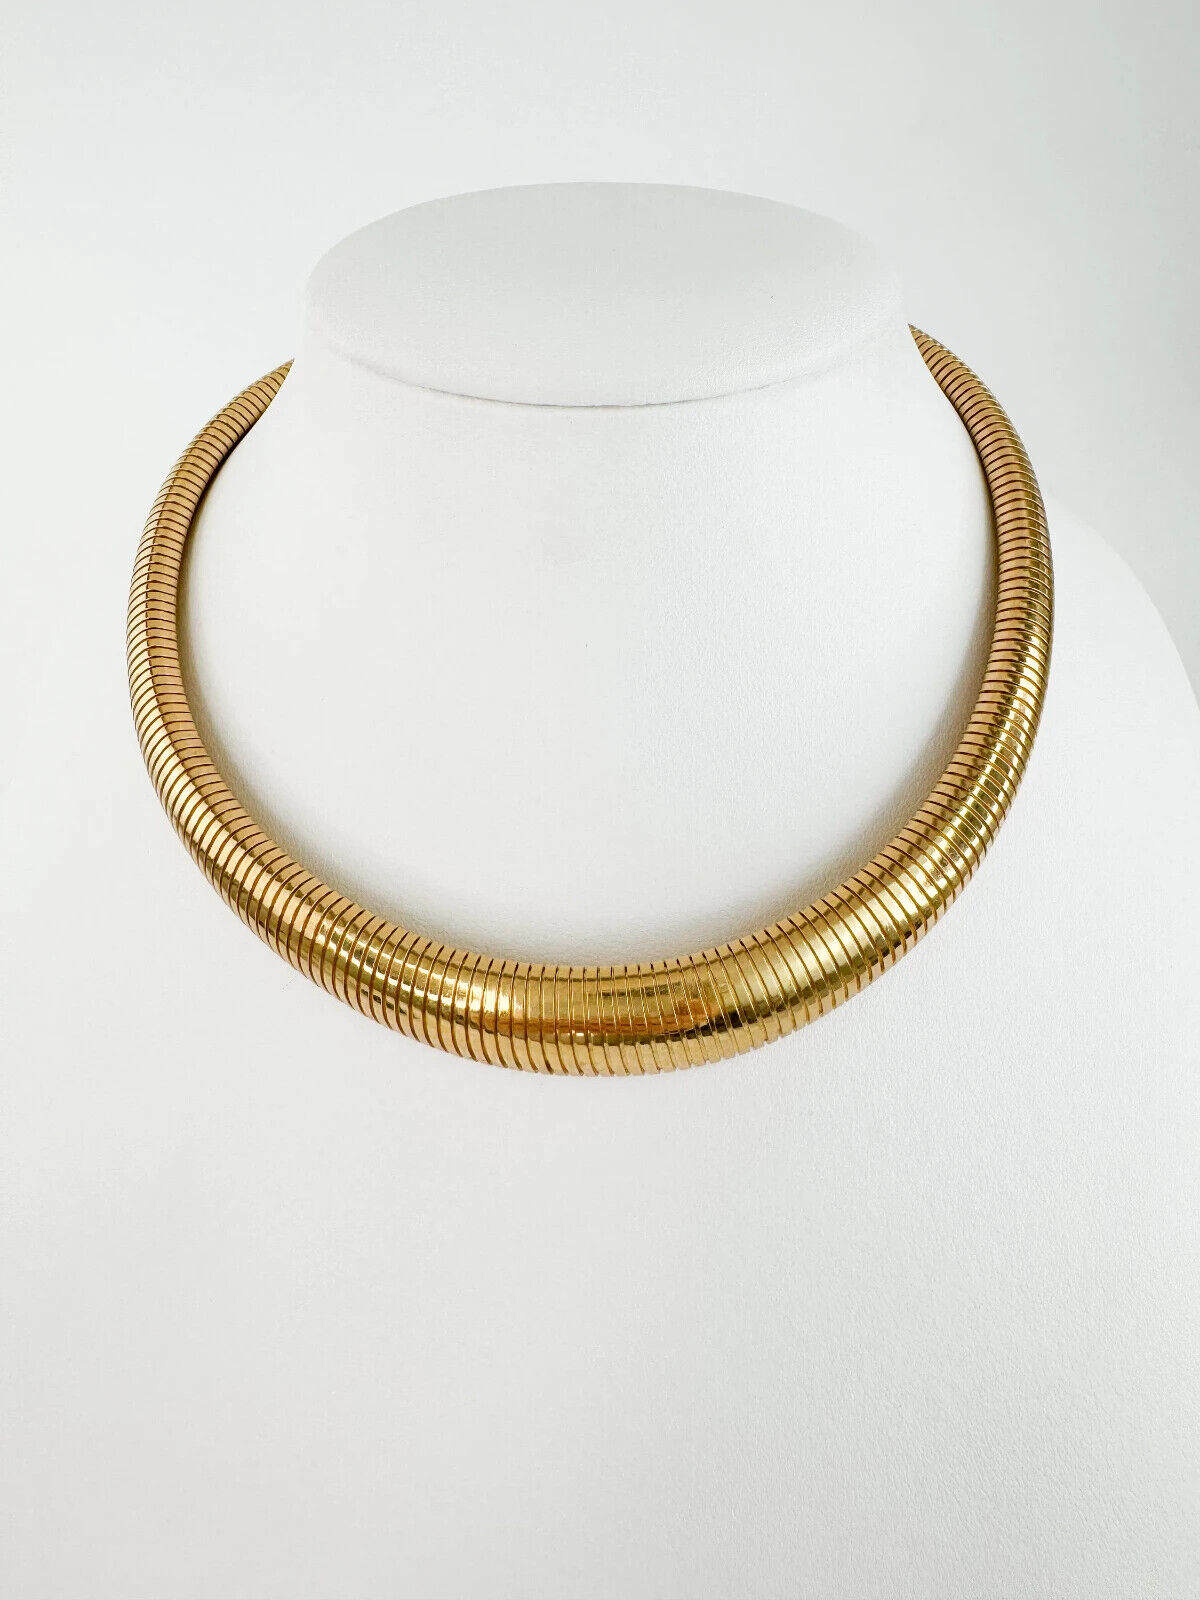 Vintage Christian Dior Necklace, Dior Chain Necklace, Dior Tubogas necklace Snake chain  Necklace, Gift for her, gold zipper choker